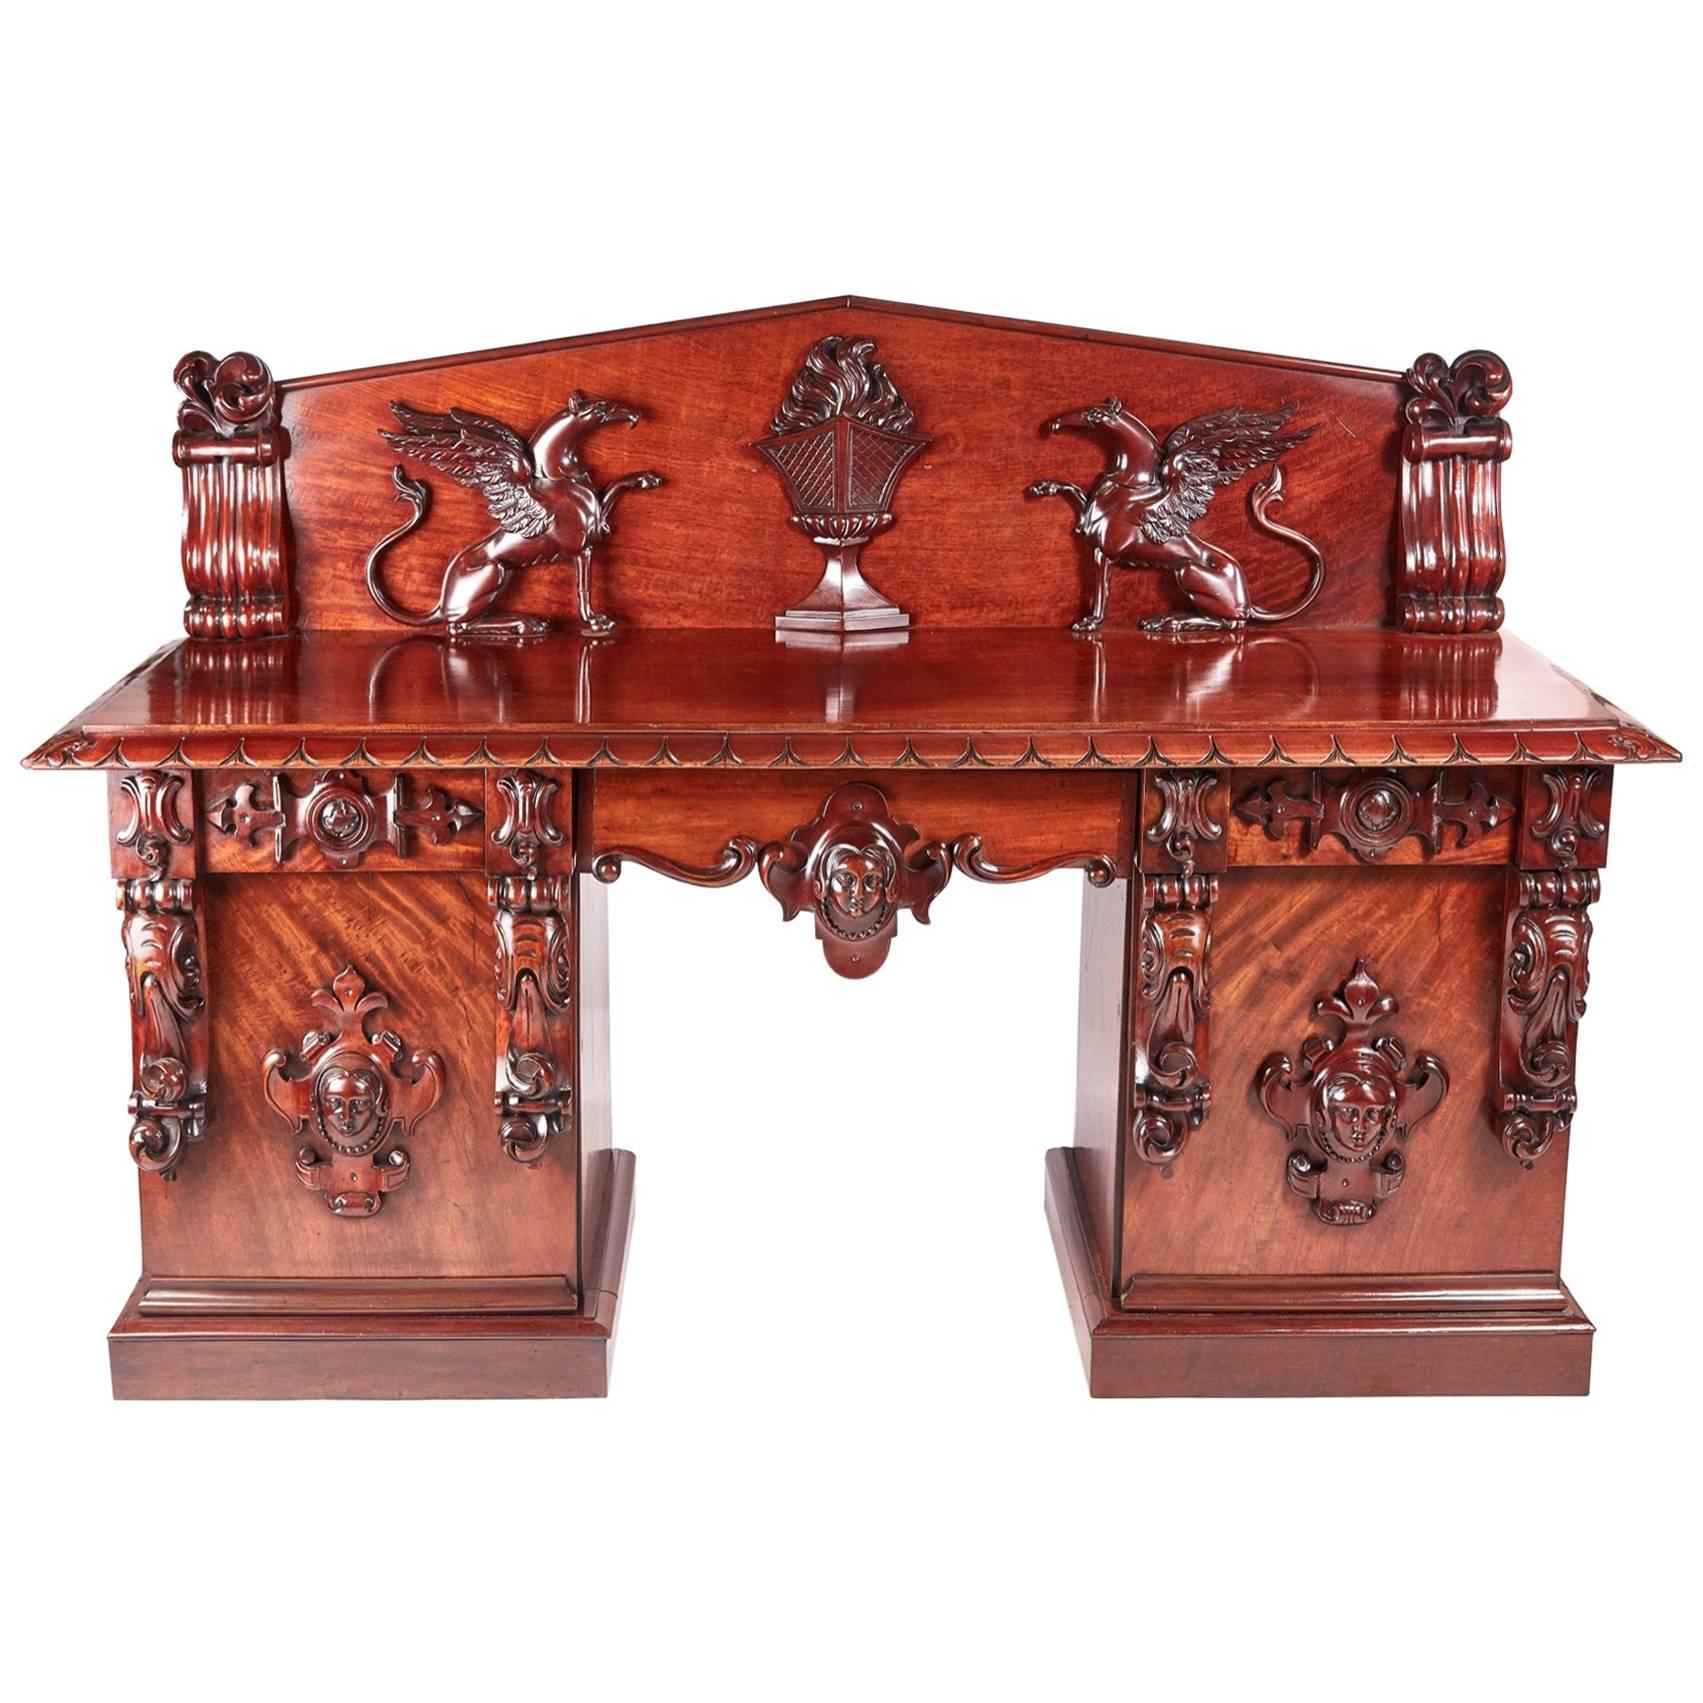 Outstanding Quality William IV Carved Mahogany Sideboard For Sale